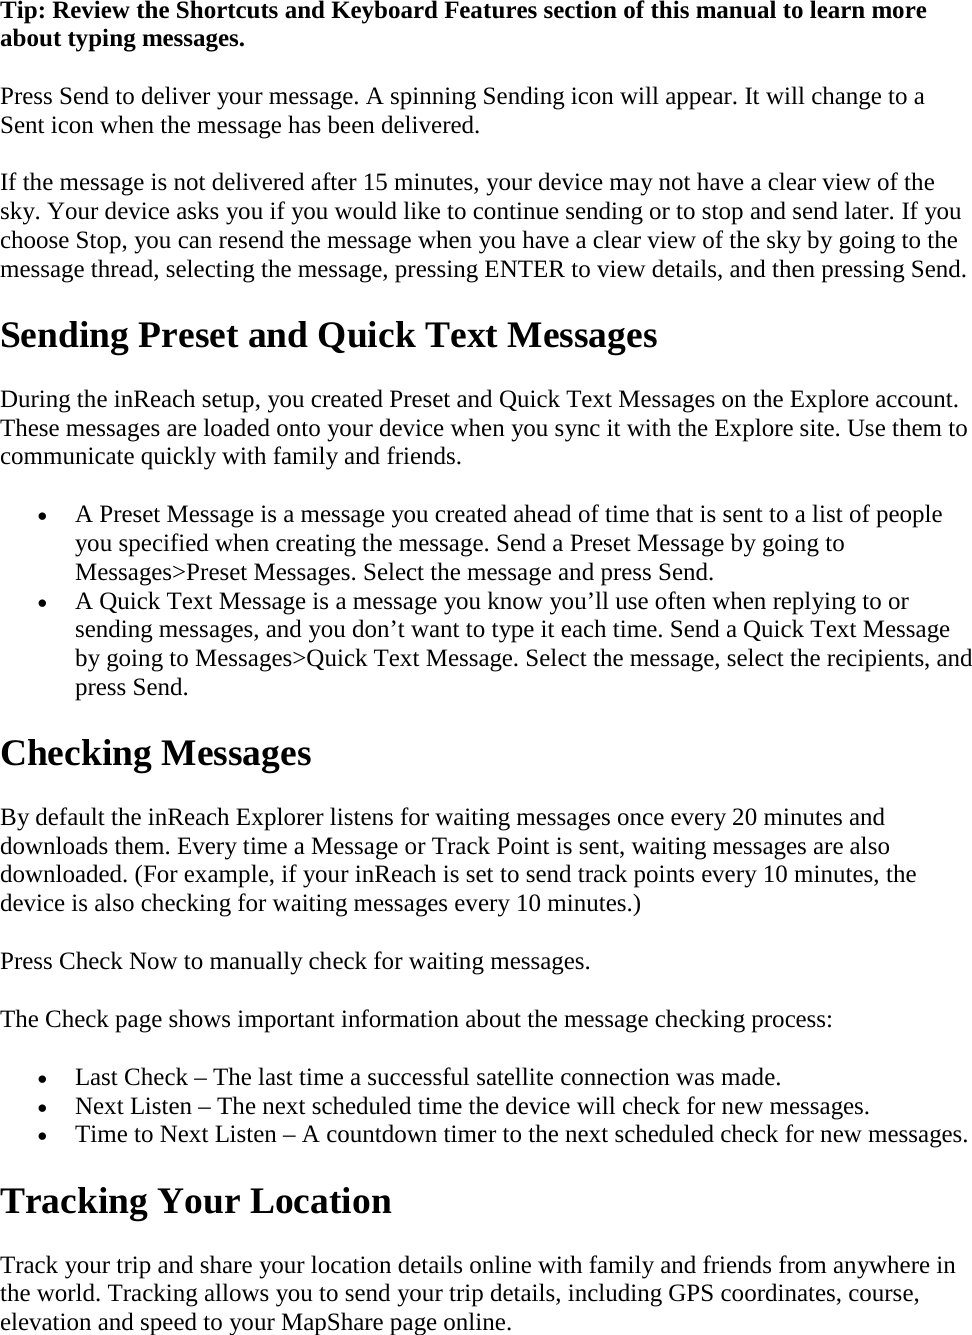 Tip: Review the Shortcuts and Keyboard Features section of this manual to learn more about typing messages. Press Send to deliver your message. A spinning Sending icon will appear. It will change to a Sent icon when the message has been delivered. If the message is not delivered after 15 minutes, your device may not have a clear view of the sky. Your device asks you if you would like to continue sending or to stop and send later. If you choose Stop, you can resend the message when you have a clear view of the sky by going to the message thread, selecting the message, pressing ENTER to view details, and then pressing Send. Sending Preset and Quick Text Messages During the inReach setup, you created Preset and Quick Text Messages on the Explore account. These messages are loaded onto your device when you sync it with the Explore site. Use them to communicate quickly with family and friends. • A Preset Message is a message you created ahead of time that is sent to a list of people you specified when creating the message. Send a Preset Message by going to Messages&gt;Preset Messages. Select the message and press Send. • A Quick Text Message is a message you know you’ll use often when replying to or sending messages, and you don’t want to type it each time. Send a Quick Text Message by going to Messages&gt;Quick Text Message. Select the message, select the recipients, and press Send. Checking Messages By default the inReach Explorer listens for waiting messages once every 20 minutes and downloads them. Every time a Message or Track Point is sent, waiting messages are also downloaded. (For example, if your inReach is set to send track points every 10 minutes, the device is also checking for waiting messages every 10 minutes.) Press Check Now to manually check for waiting messages.  The Check page shows important information about the message checking process: • Last Check – The last time a successful satellite connection was made. • Next Listen – The next scheduled time the device will check for new messages. • Time to Next Listen – A countdown timer to the next scheduled check for new messages. Tracking Your Location Track your trip and share your location details online with family and friends from anywhere in the world. Tracking allows you to send your trip details, including GPS coordinates, course, elevation and speed to your MapShare page online.  